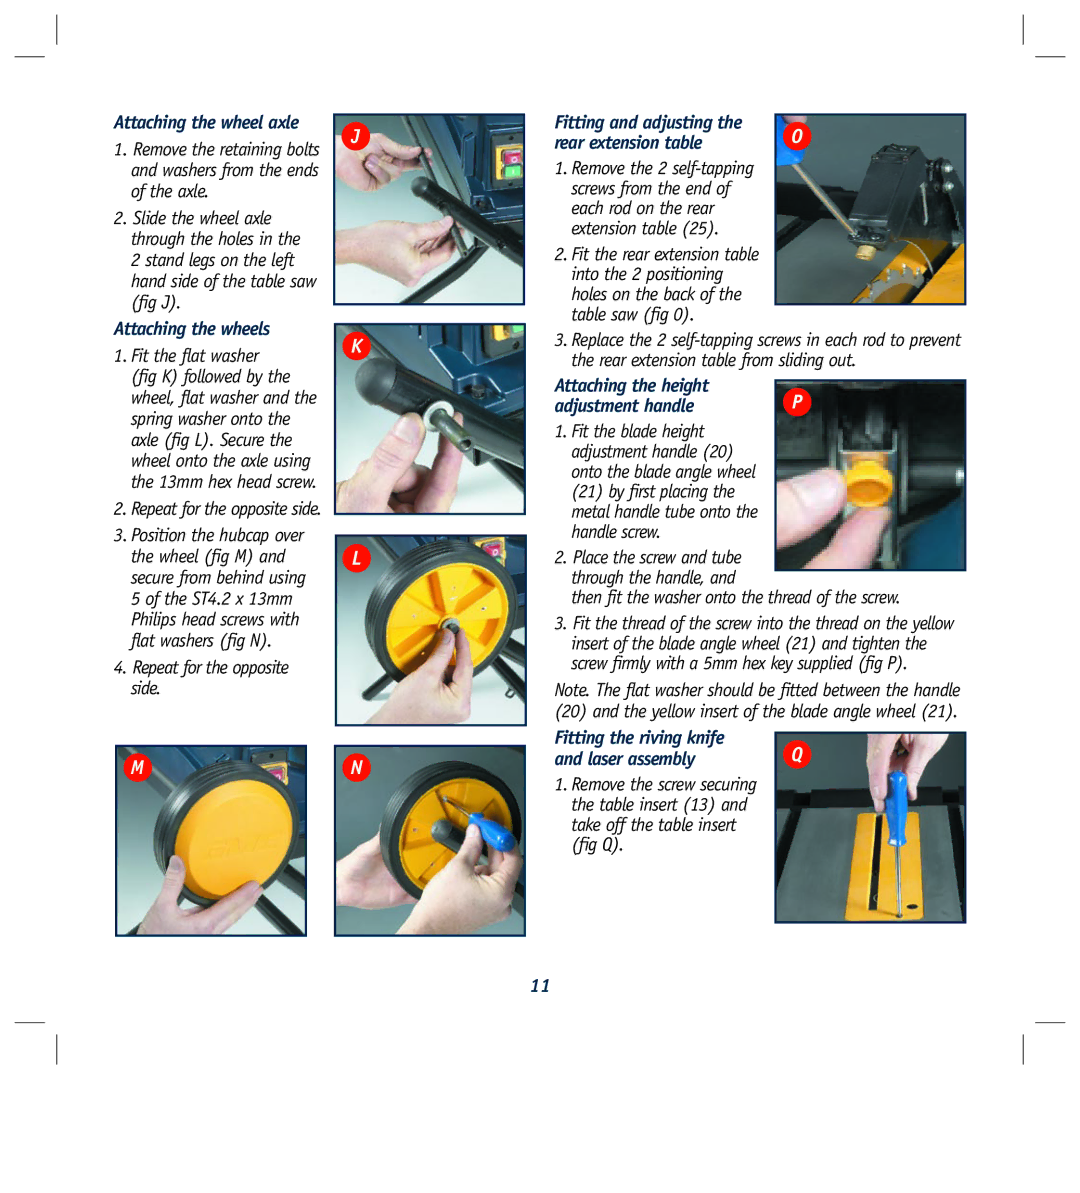 Global Machinery Company LS250TS2000W instruction manual Attaching the wheel axle, Attaching the wheels 